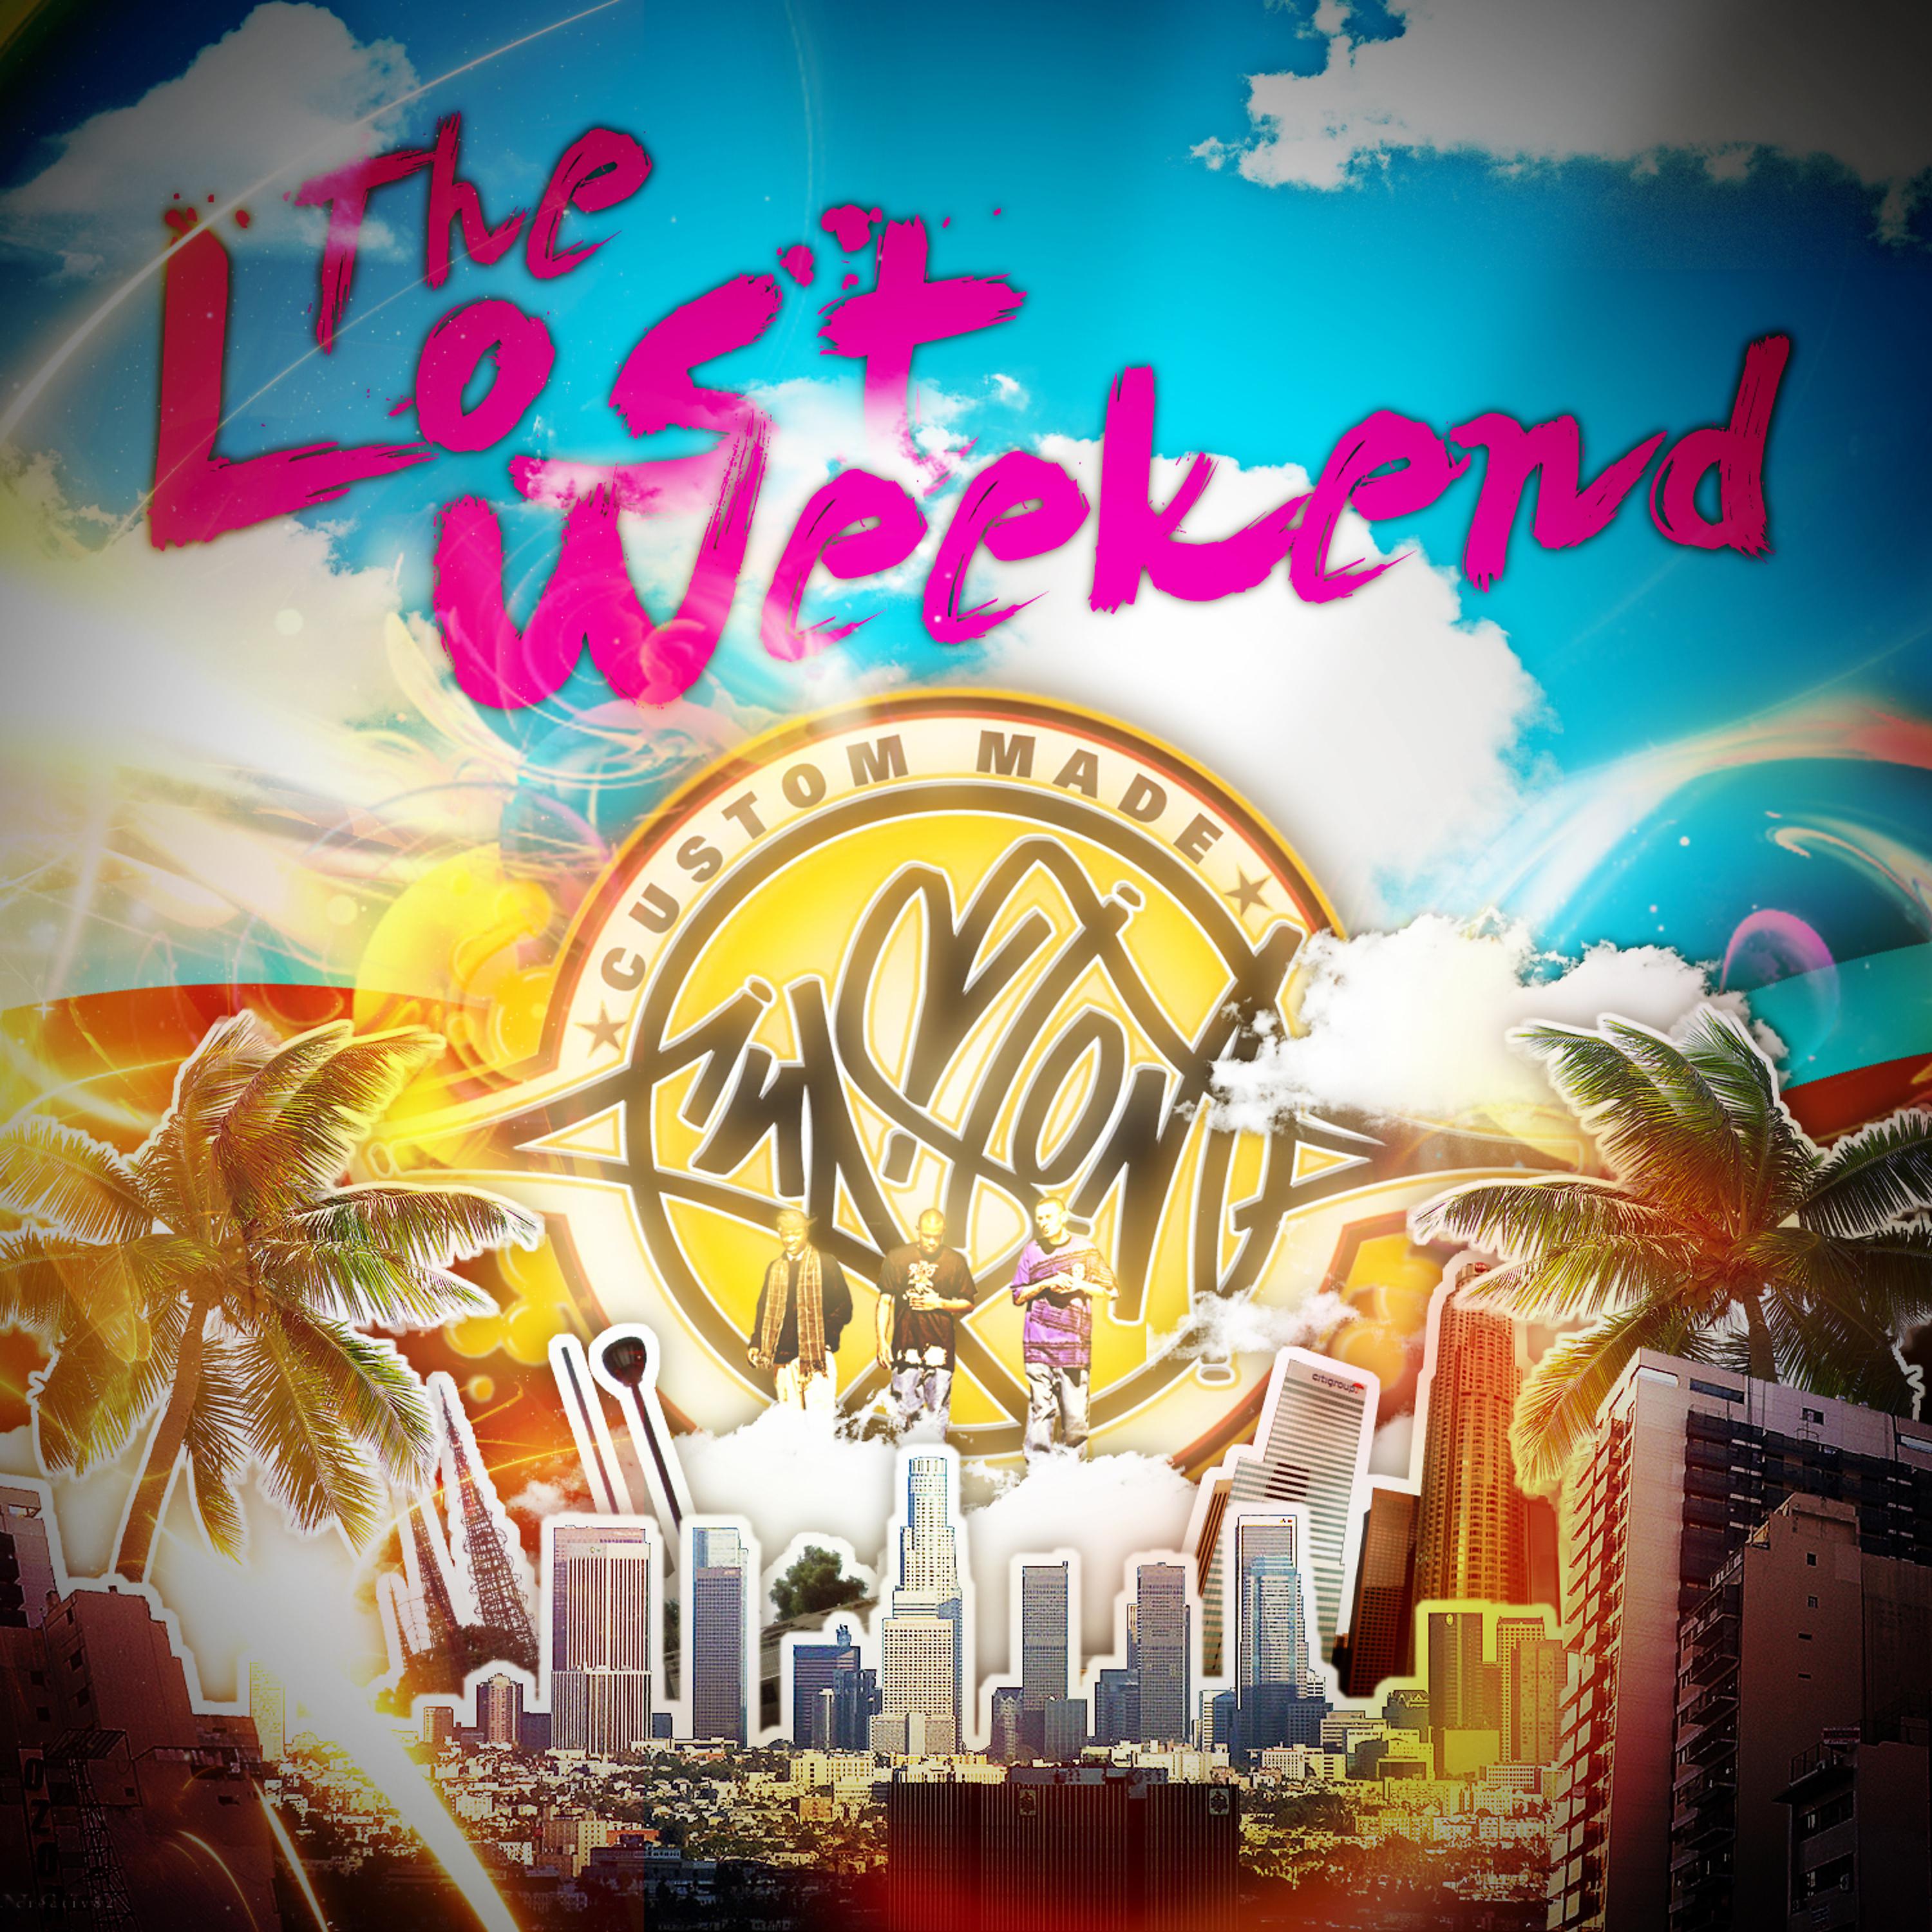 Постер альбома The Lost Weekend